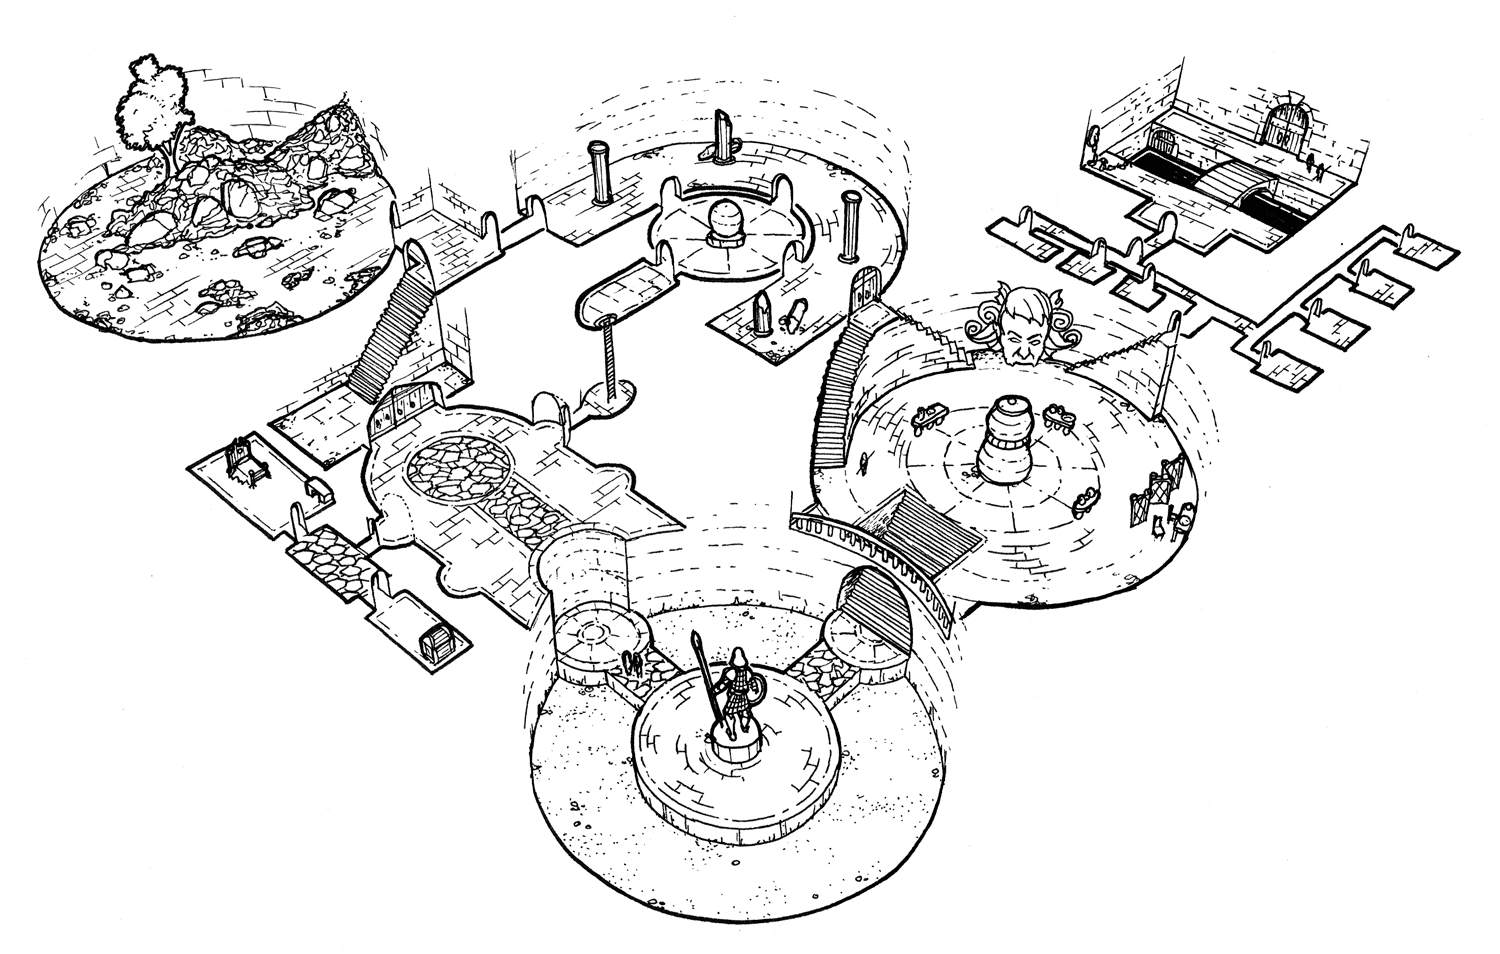 Simultaneous Interconnected Dungeon Crawl